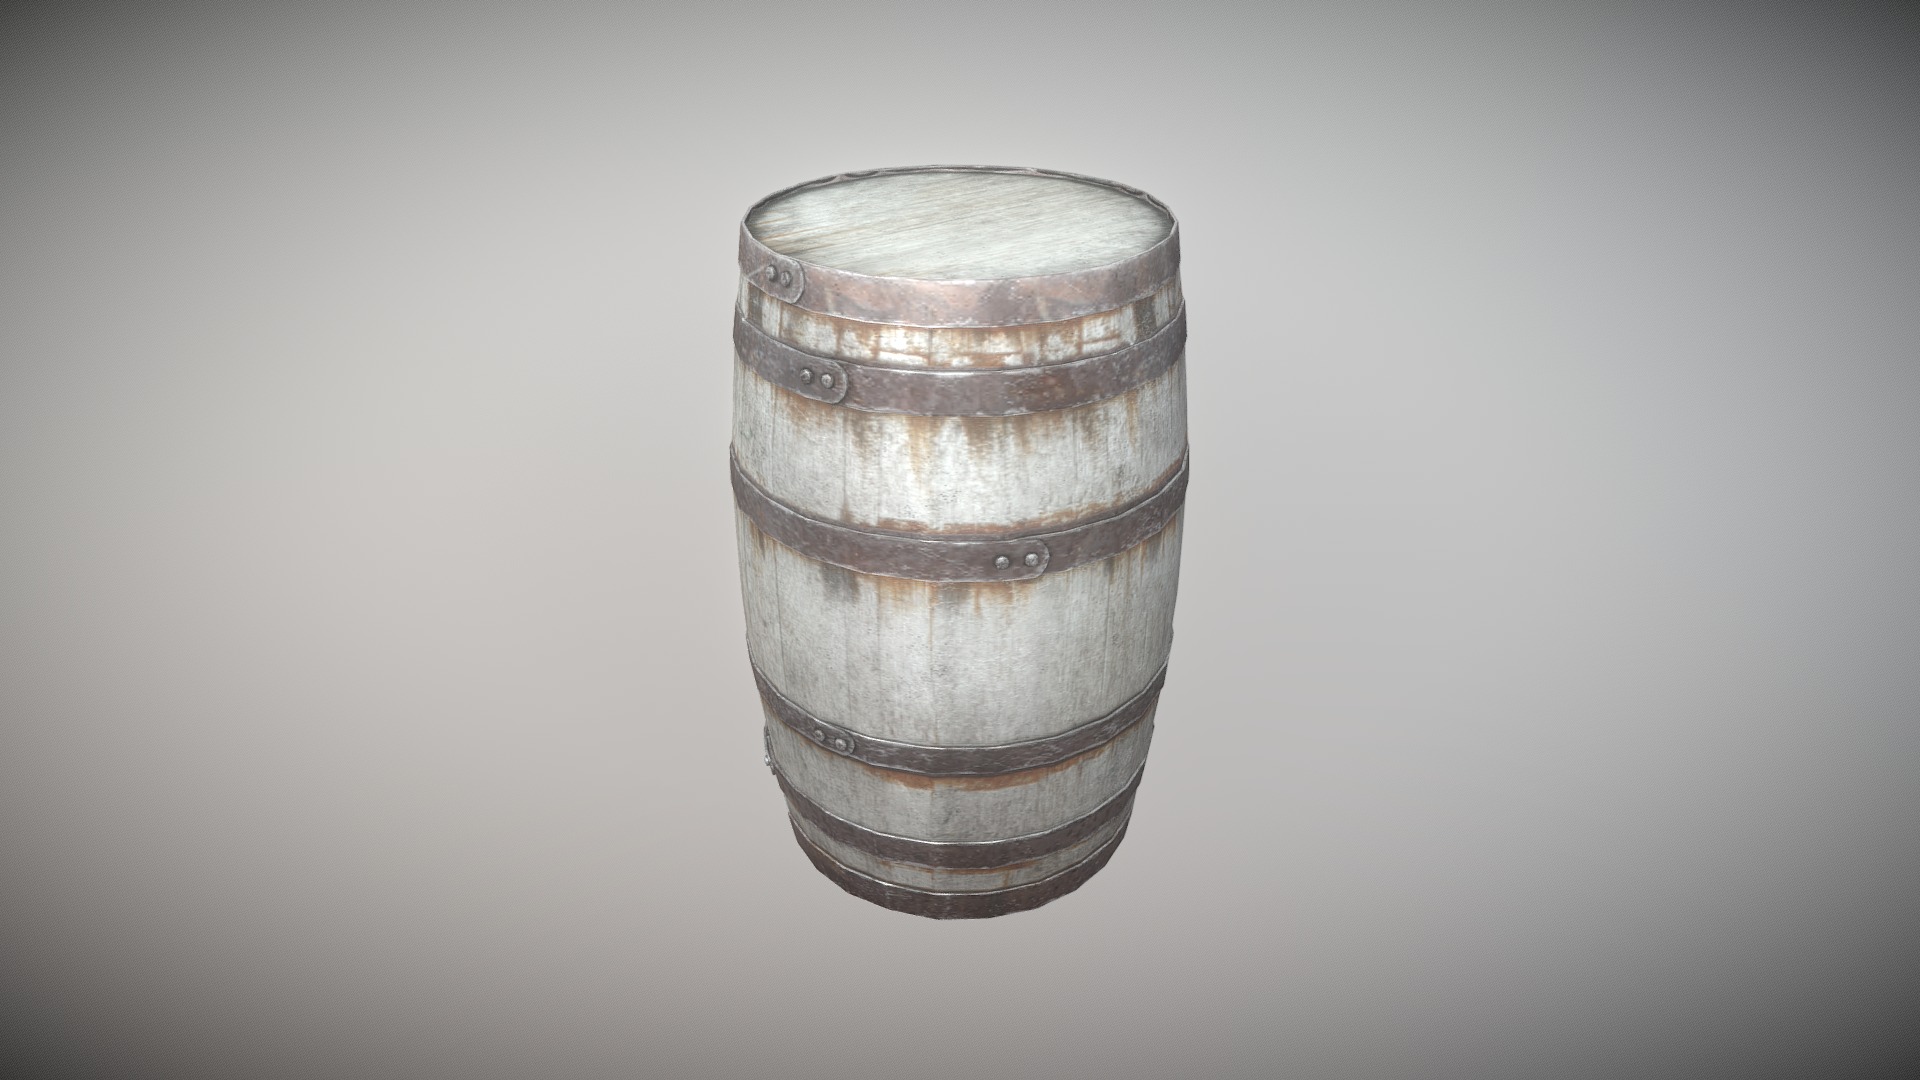 3D model Barrel A - This is a 3D model of the Barrel A. The 3D model is about a glass jar with a brown substance.